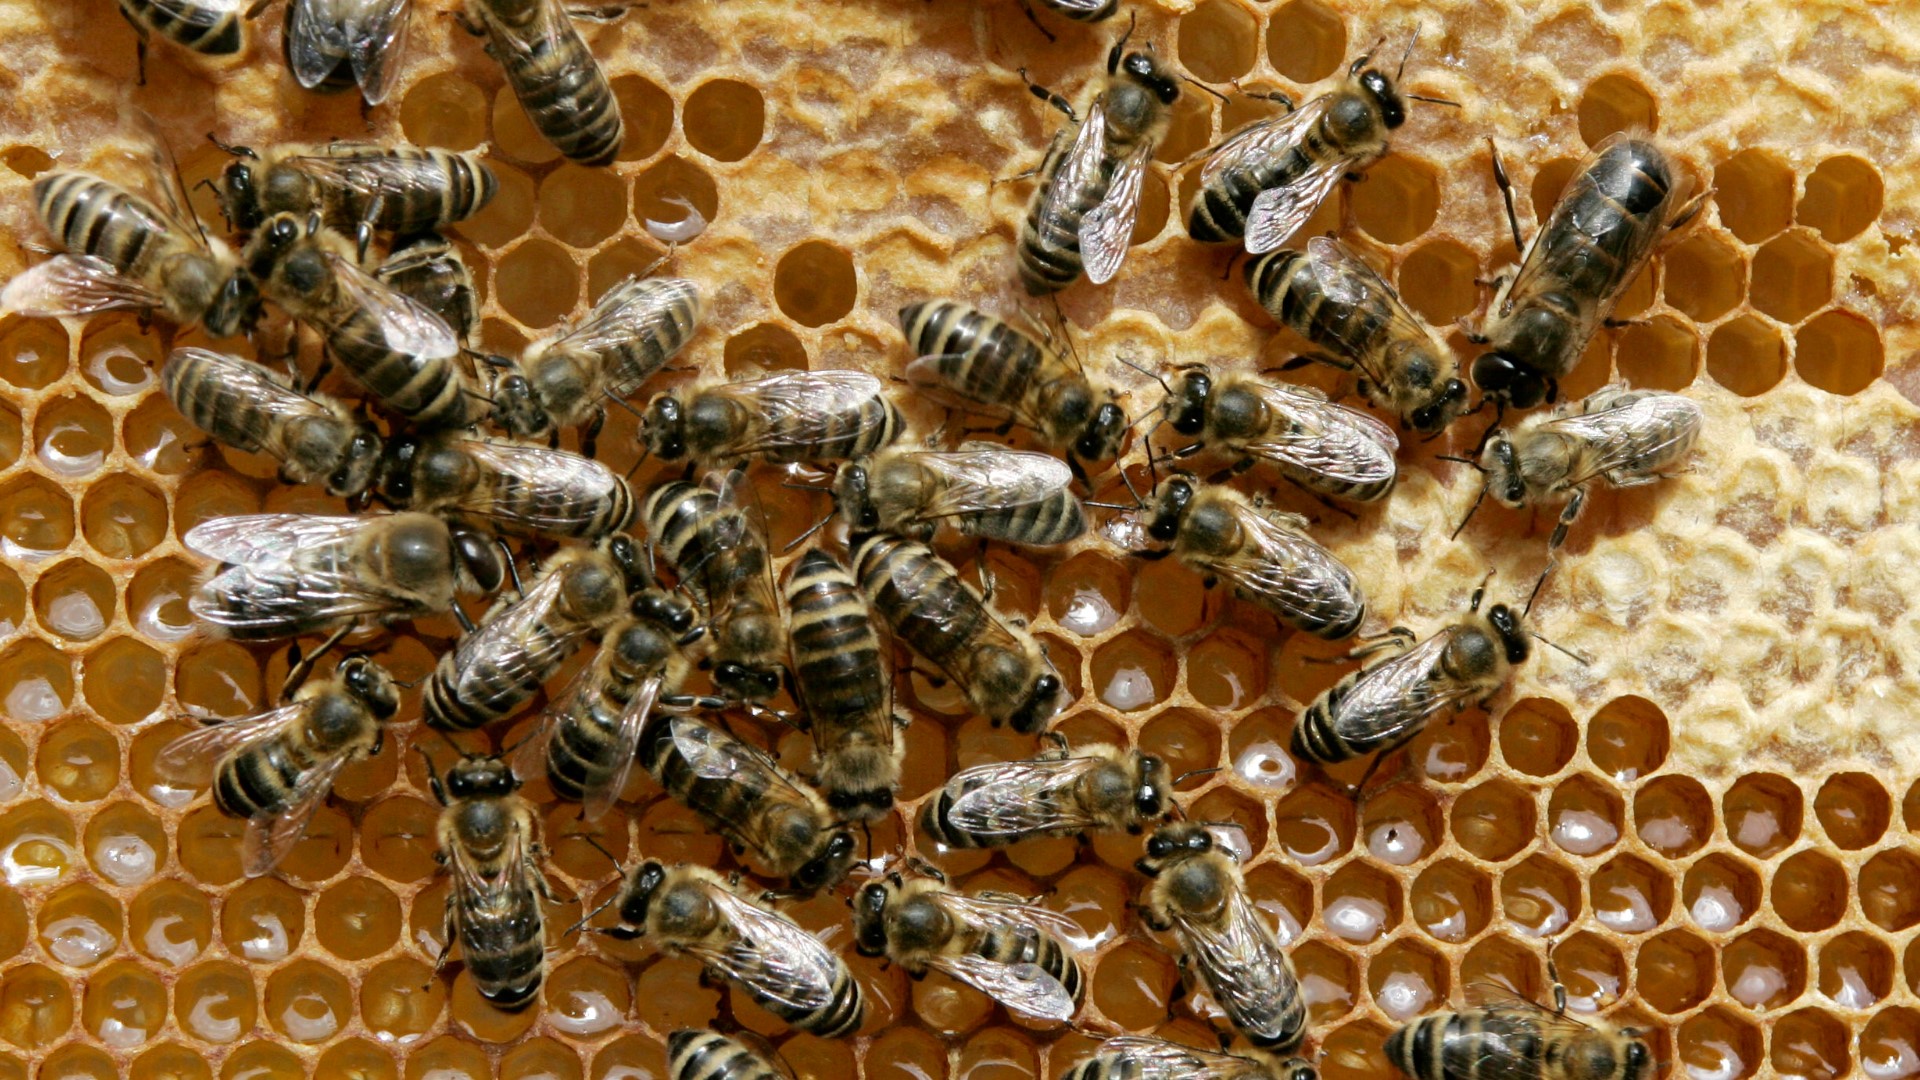 A Moody man was died Friday after hitting a large beehive while mowing his lawn.